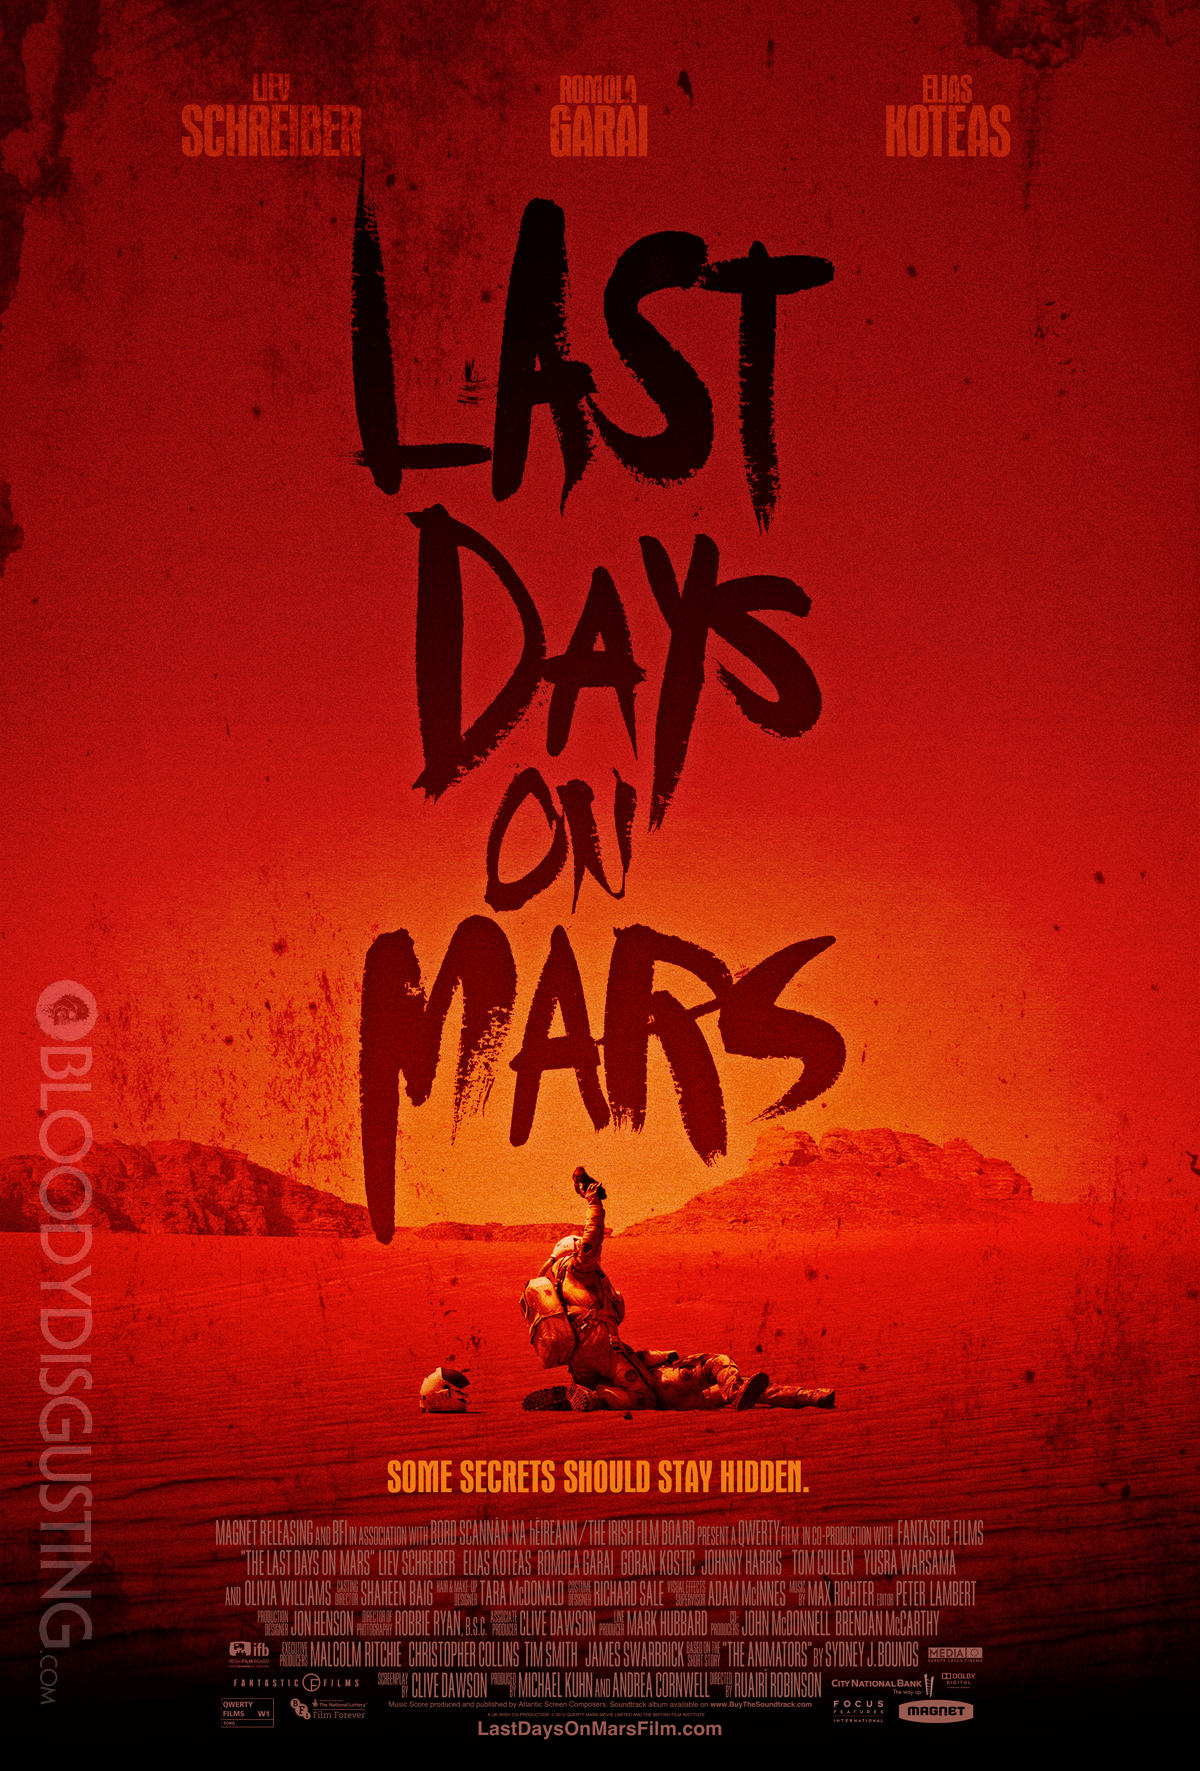 The Last Days On Mars Backgrounds, Compatible - PC, Mobile, Gadgets| 1200x1771 px